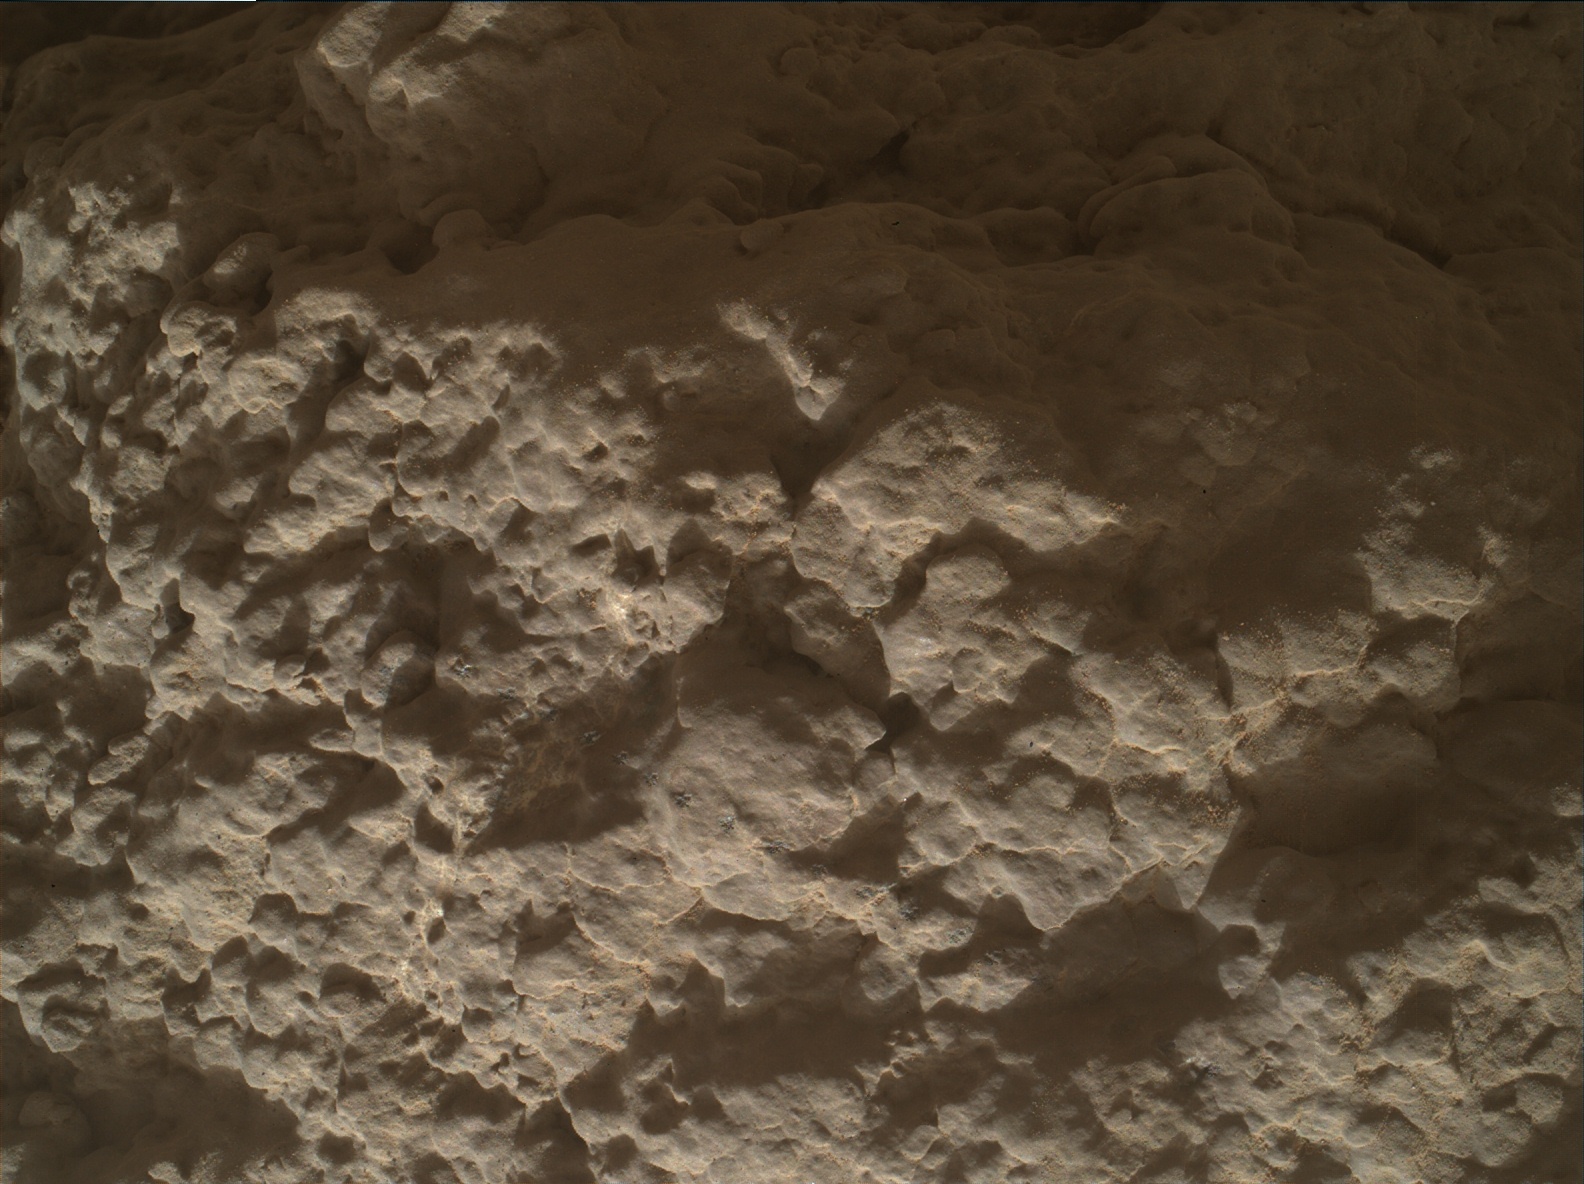 Nasa's Mars rover Curiosity acquired this image using its Mars Hand Lens Imager (MAHLI) on Sol 2589